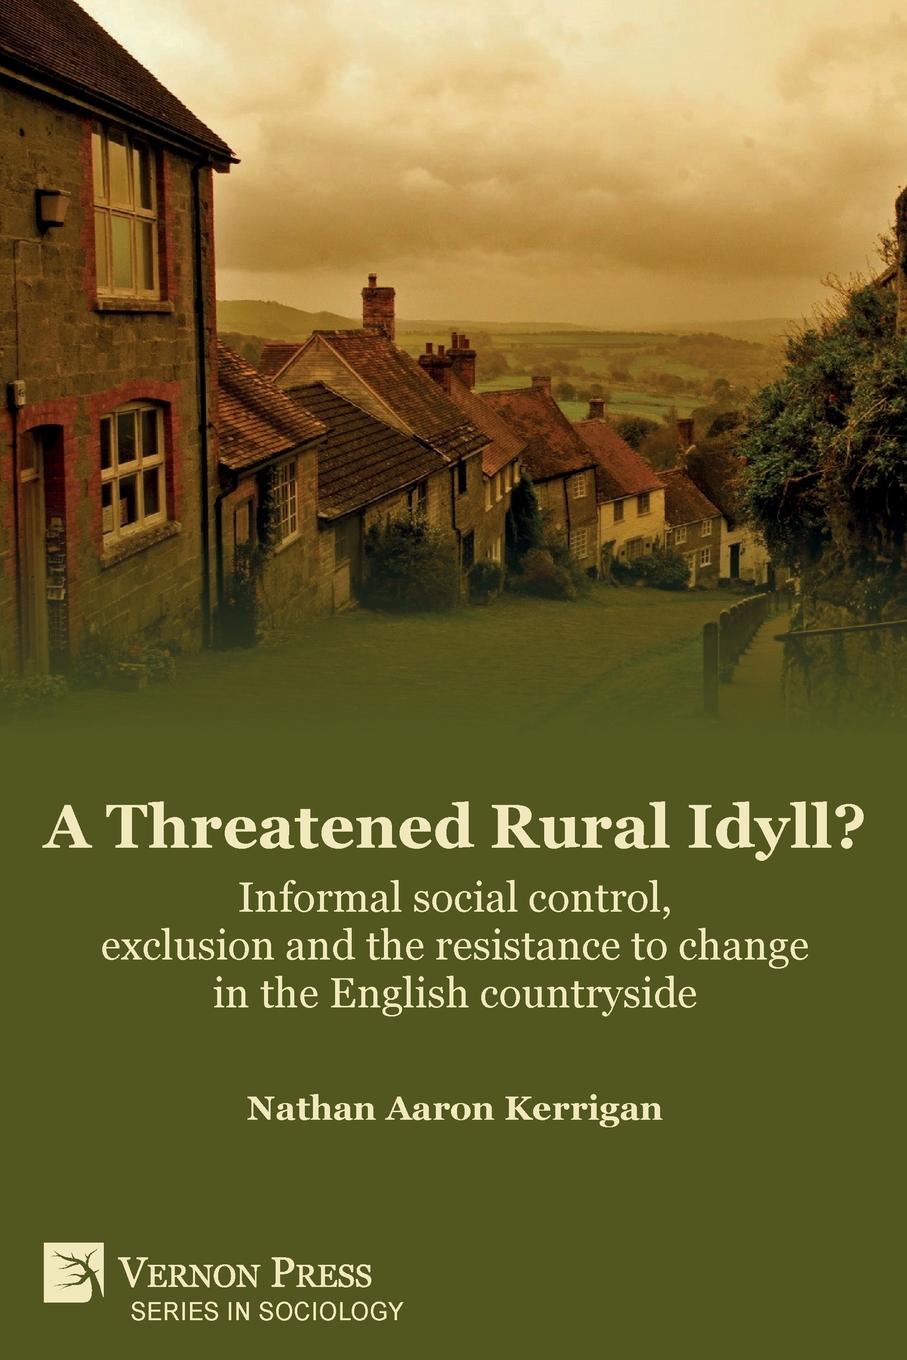 A Threatened Rural Idyll. Informal social control, exclusion and the resistance to change in the English countryside